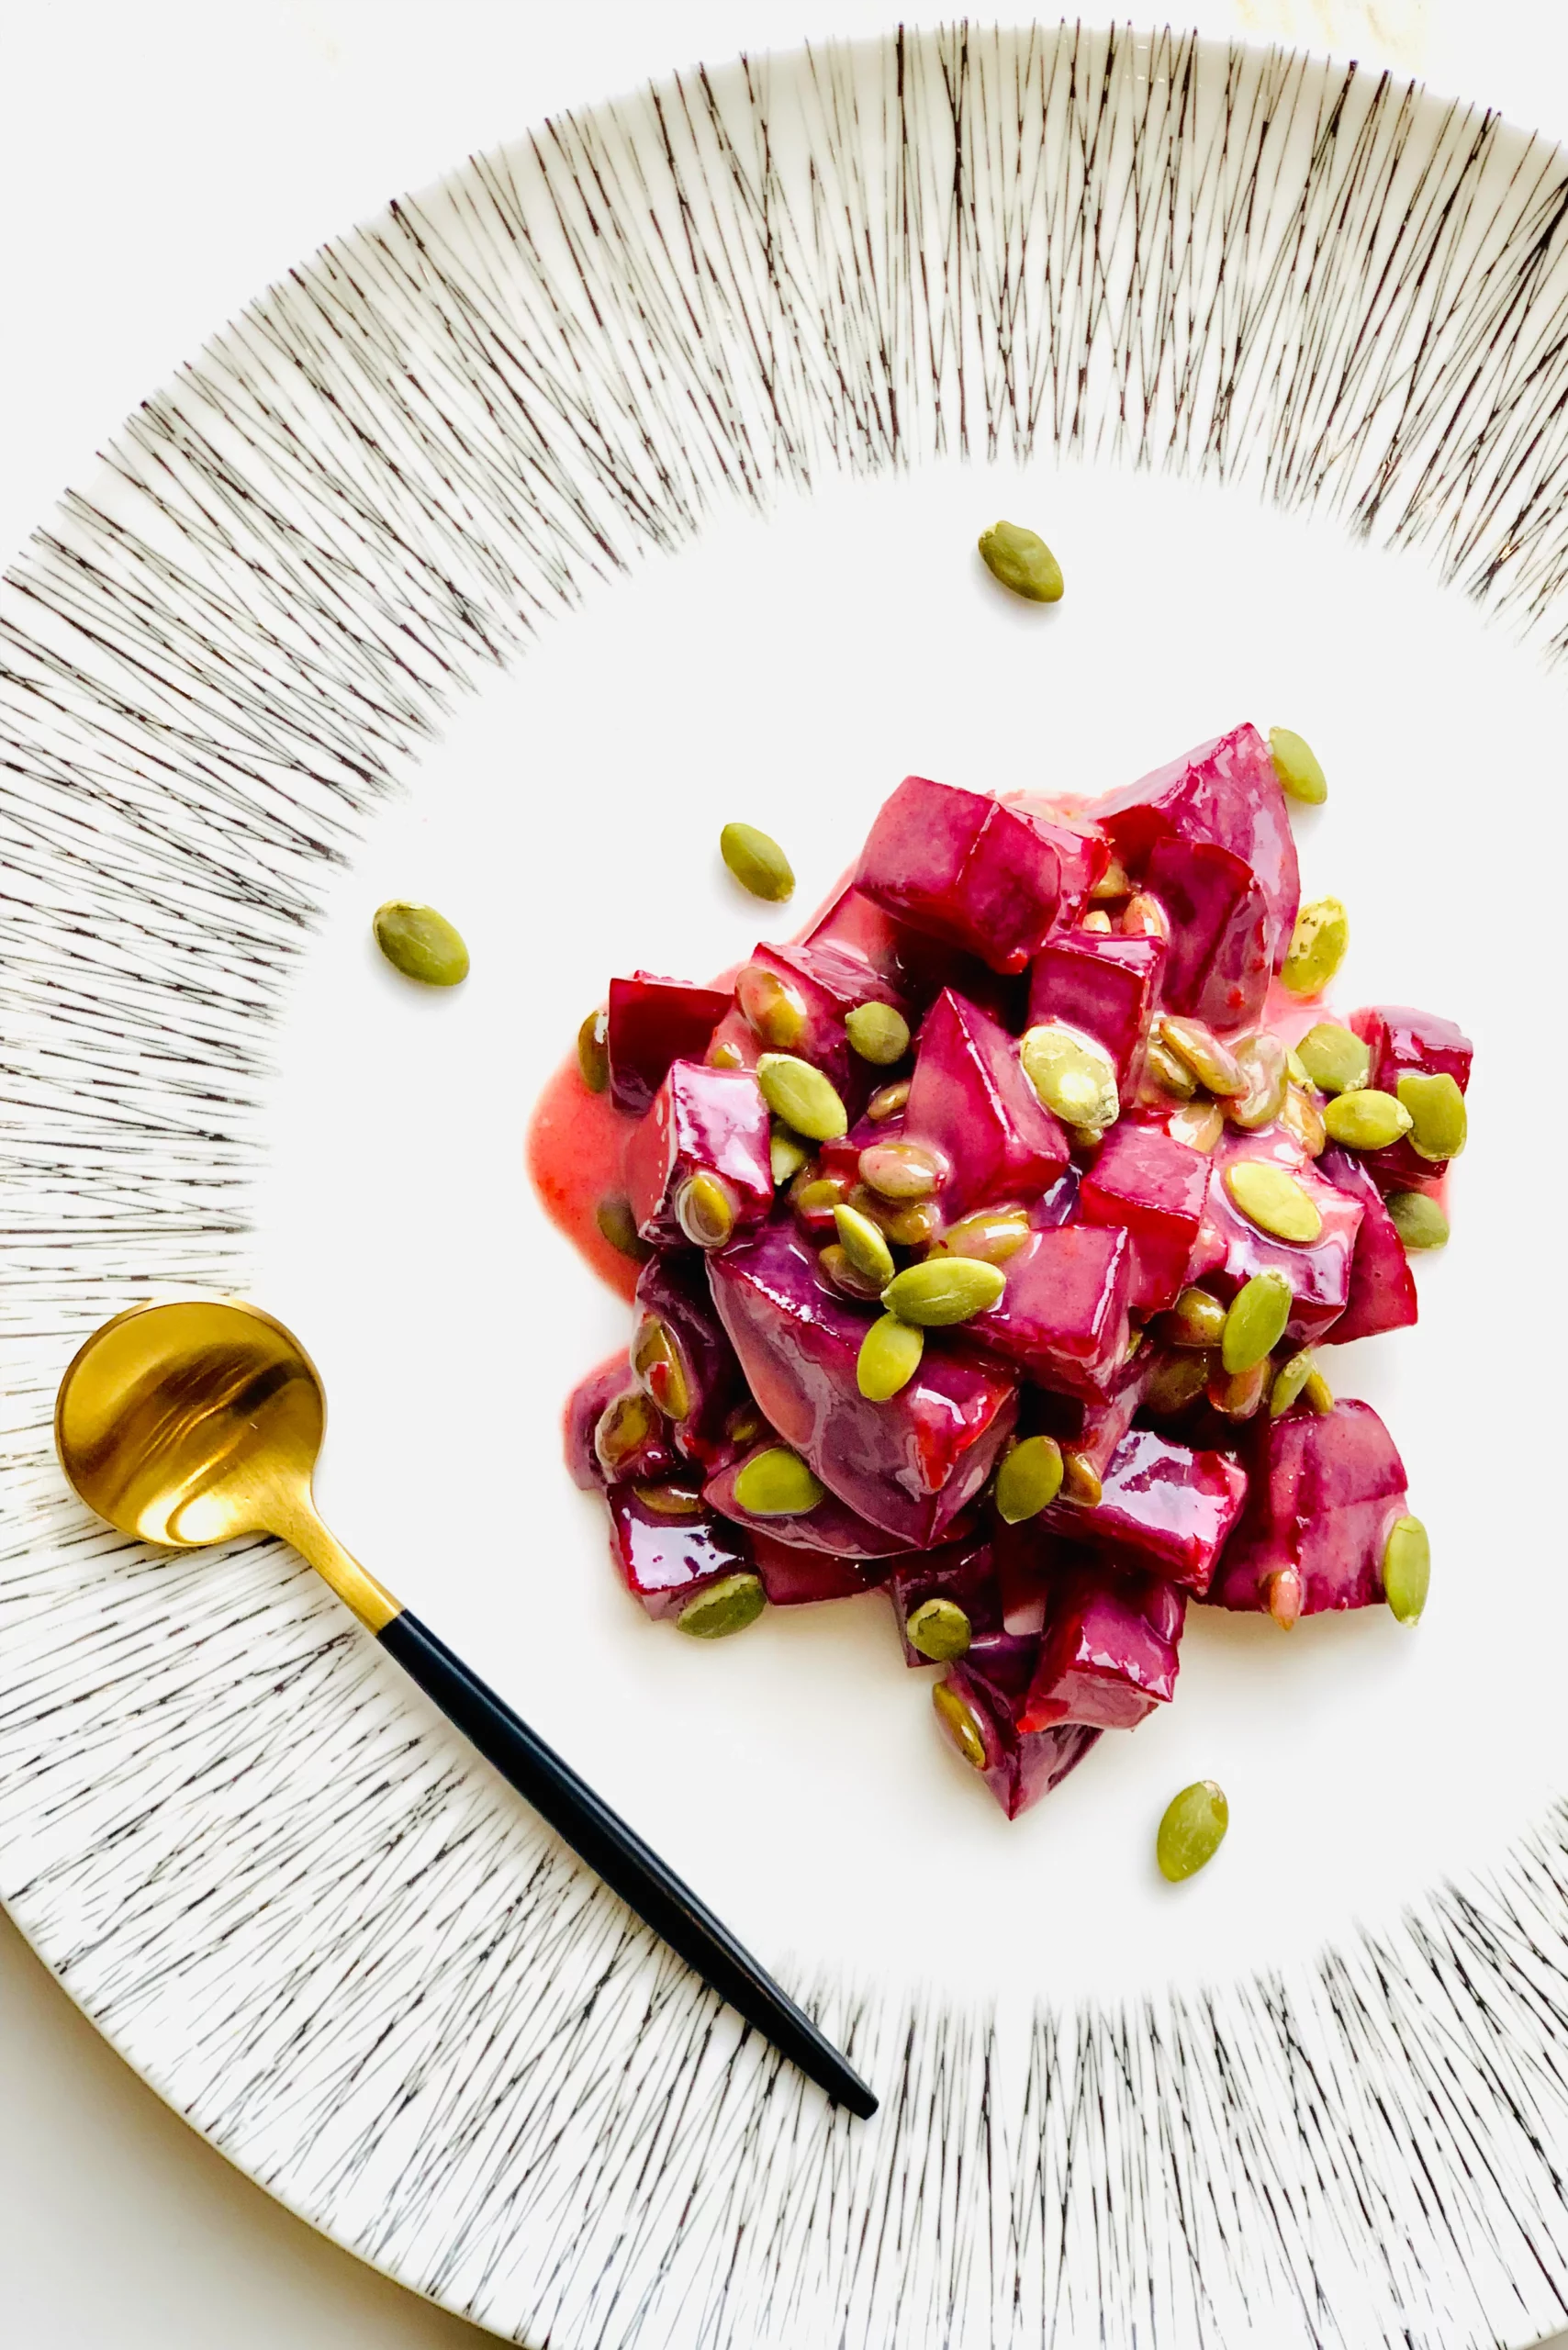 image of beets plated with a gold spoon